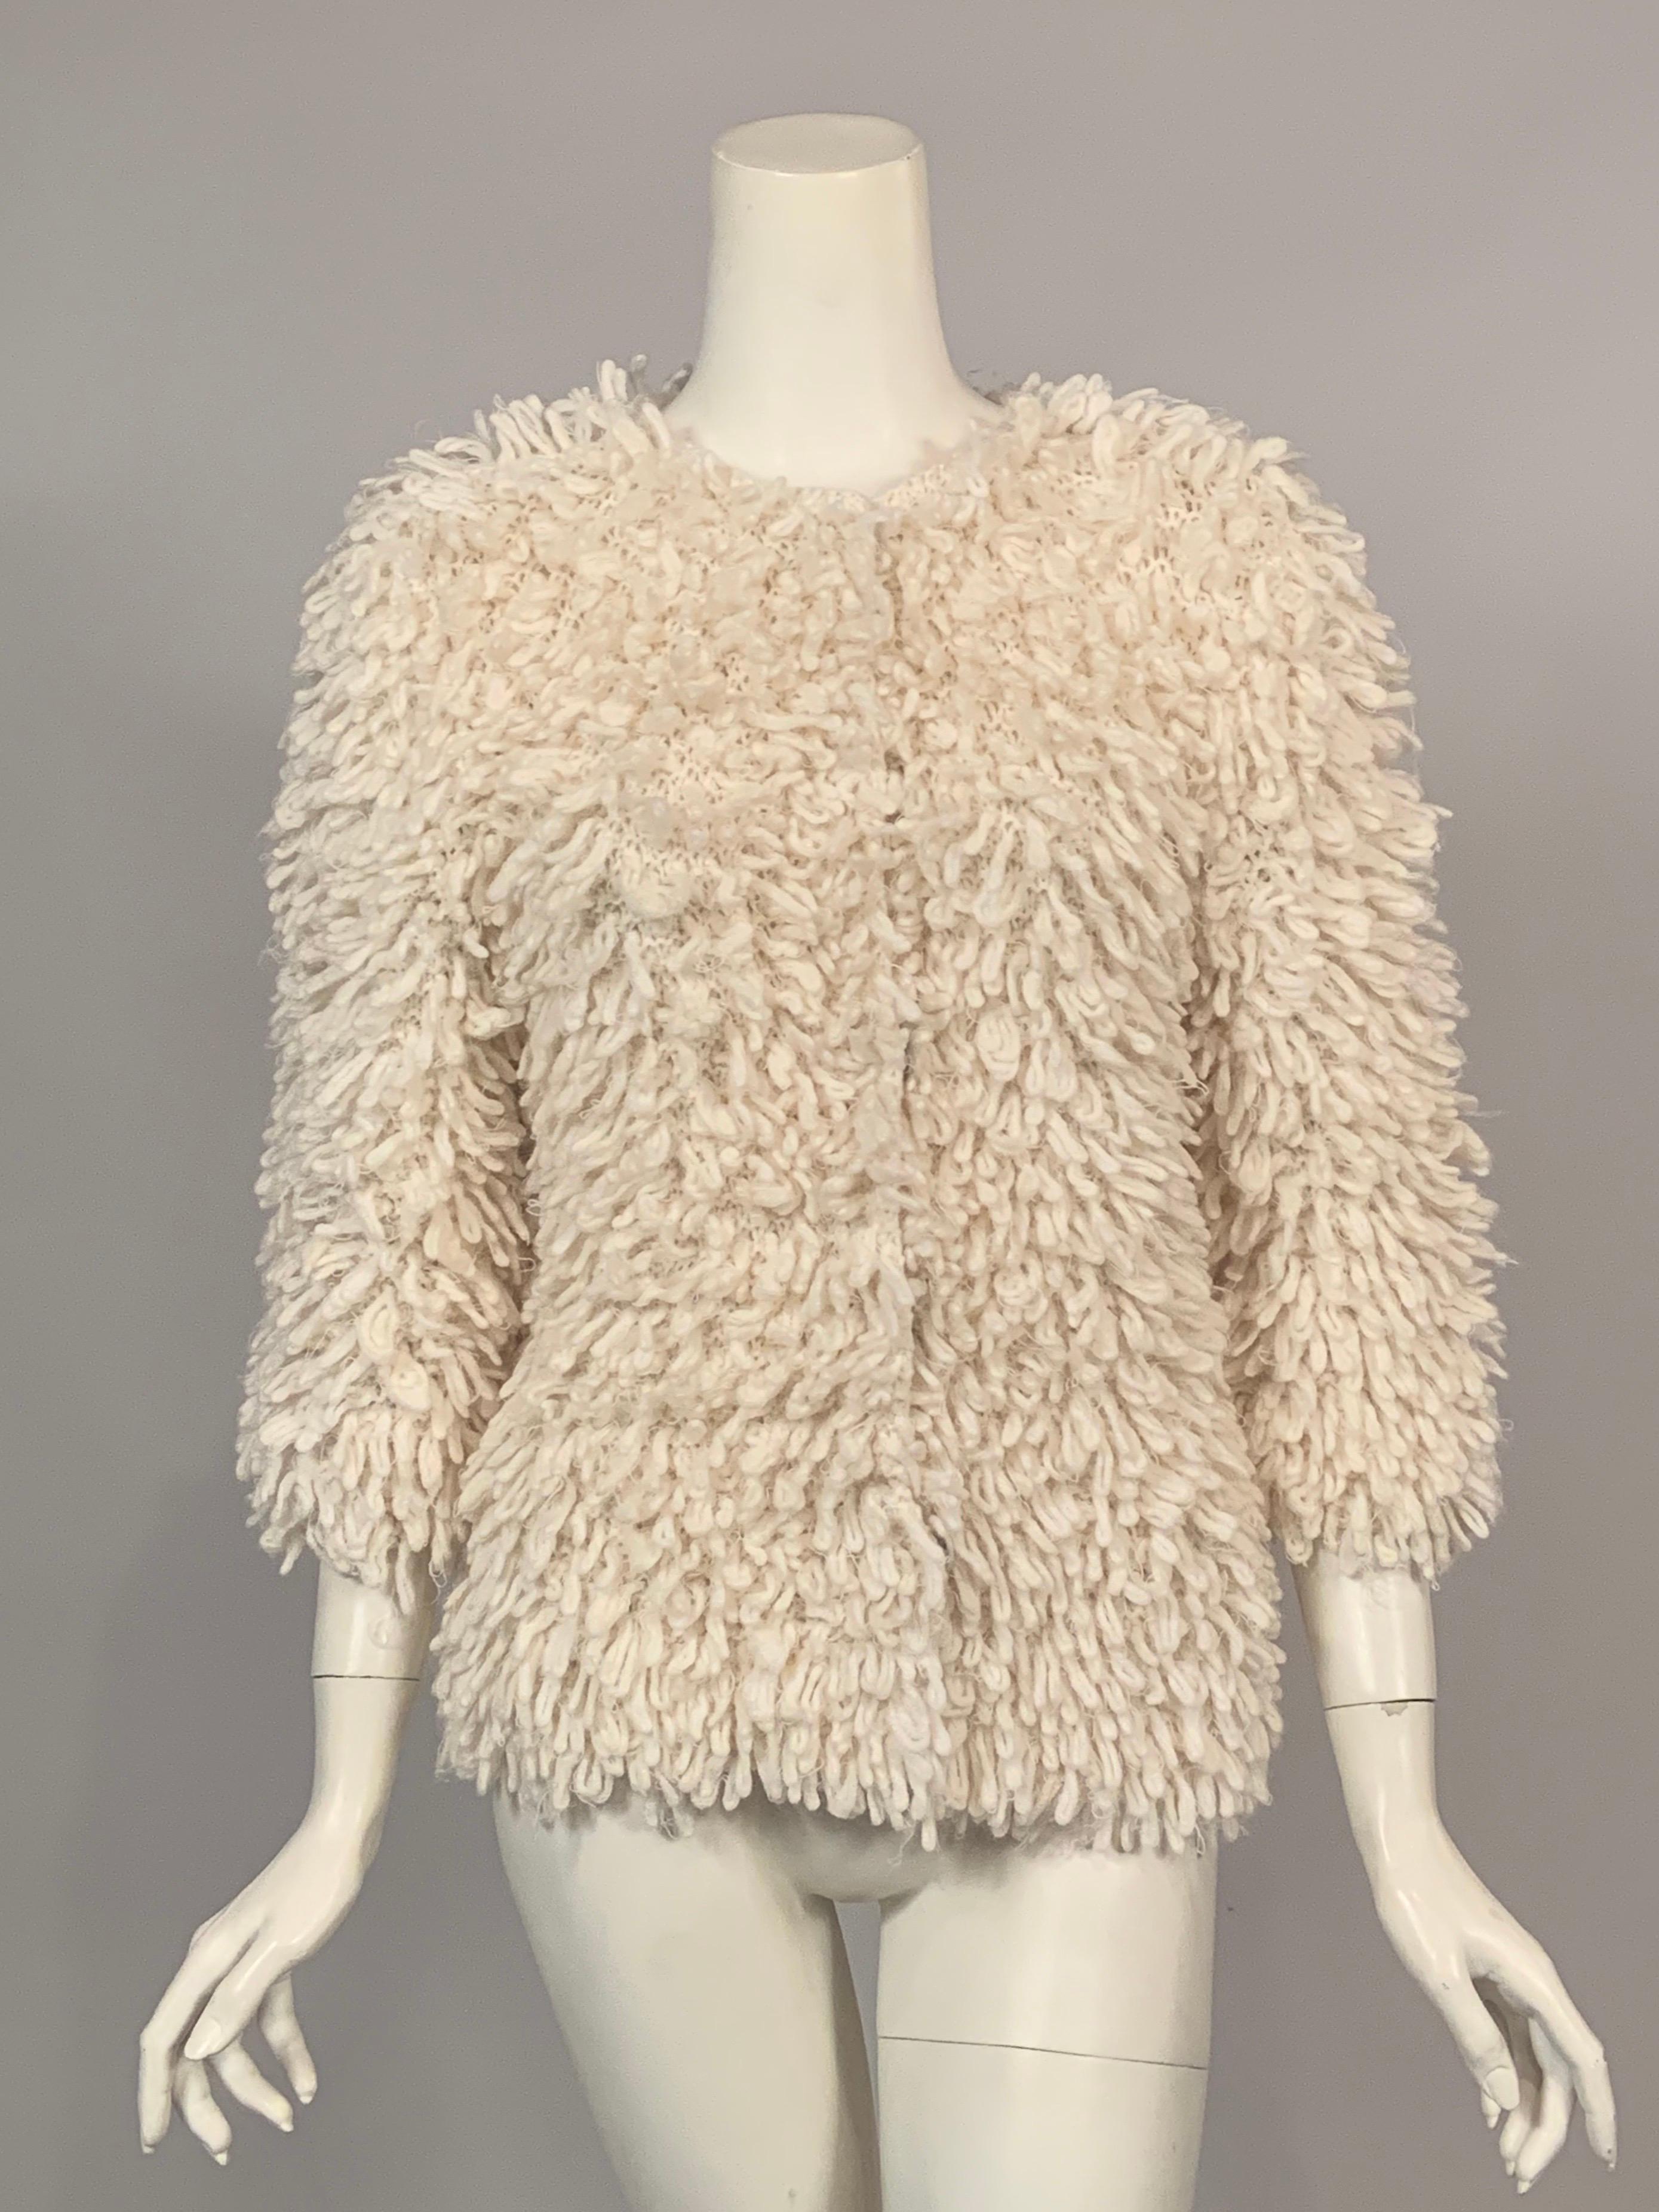 Creamy Cashmere and Mohair yarns in a 50/50 mix are hand knit into a cozy and fun sweater jacket designed by Oscar de la Renta. It has a fantastic looped yarn surface and closes at the center front with five oversized snaps. Never worn, it still